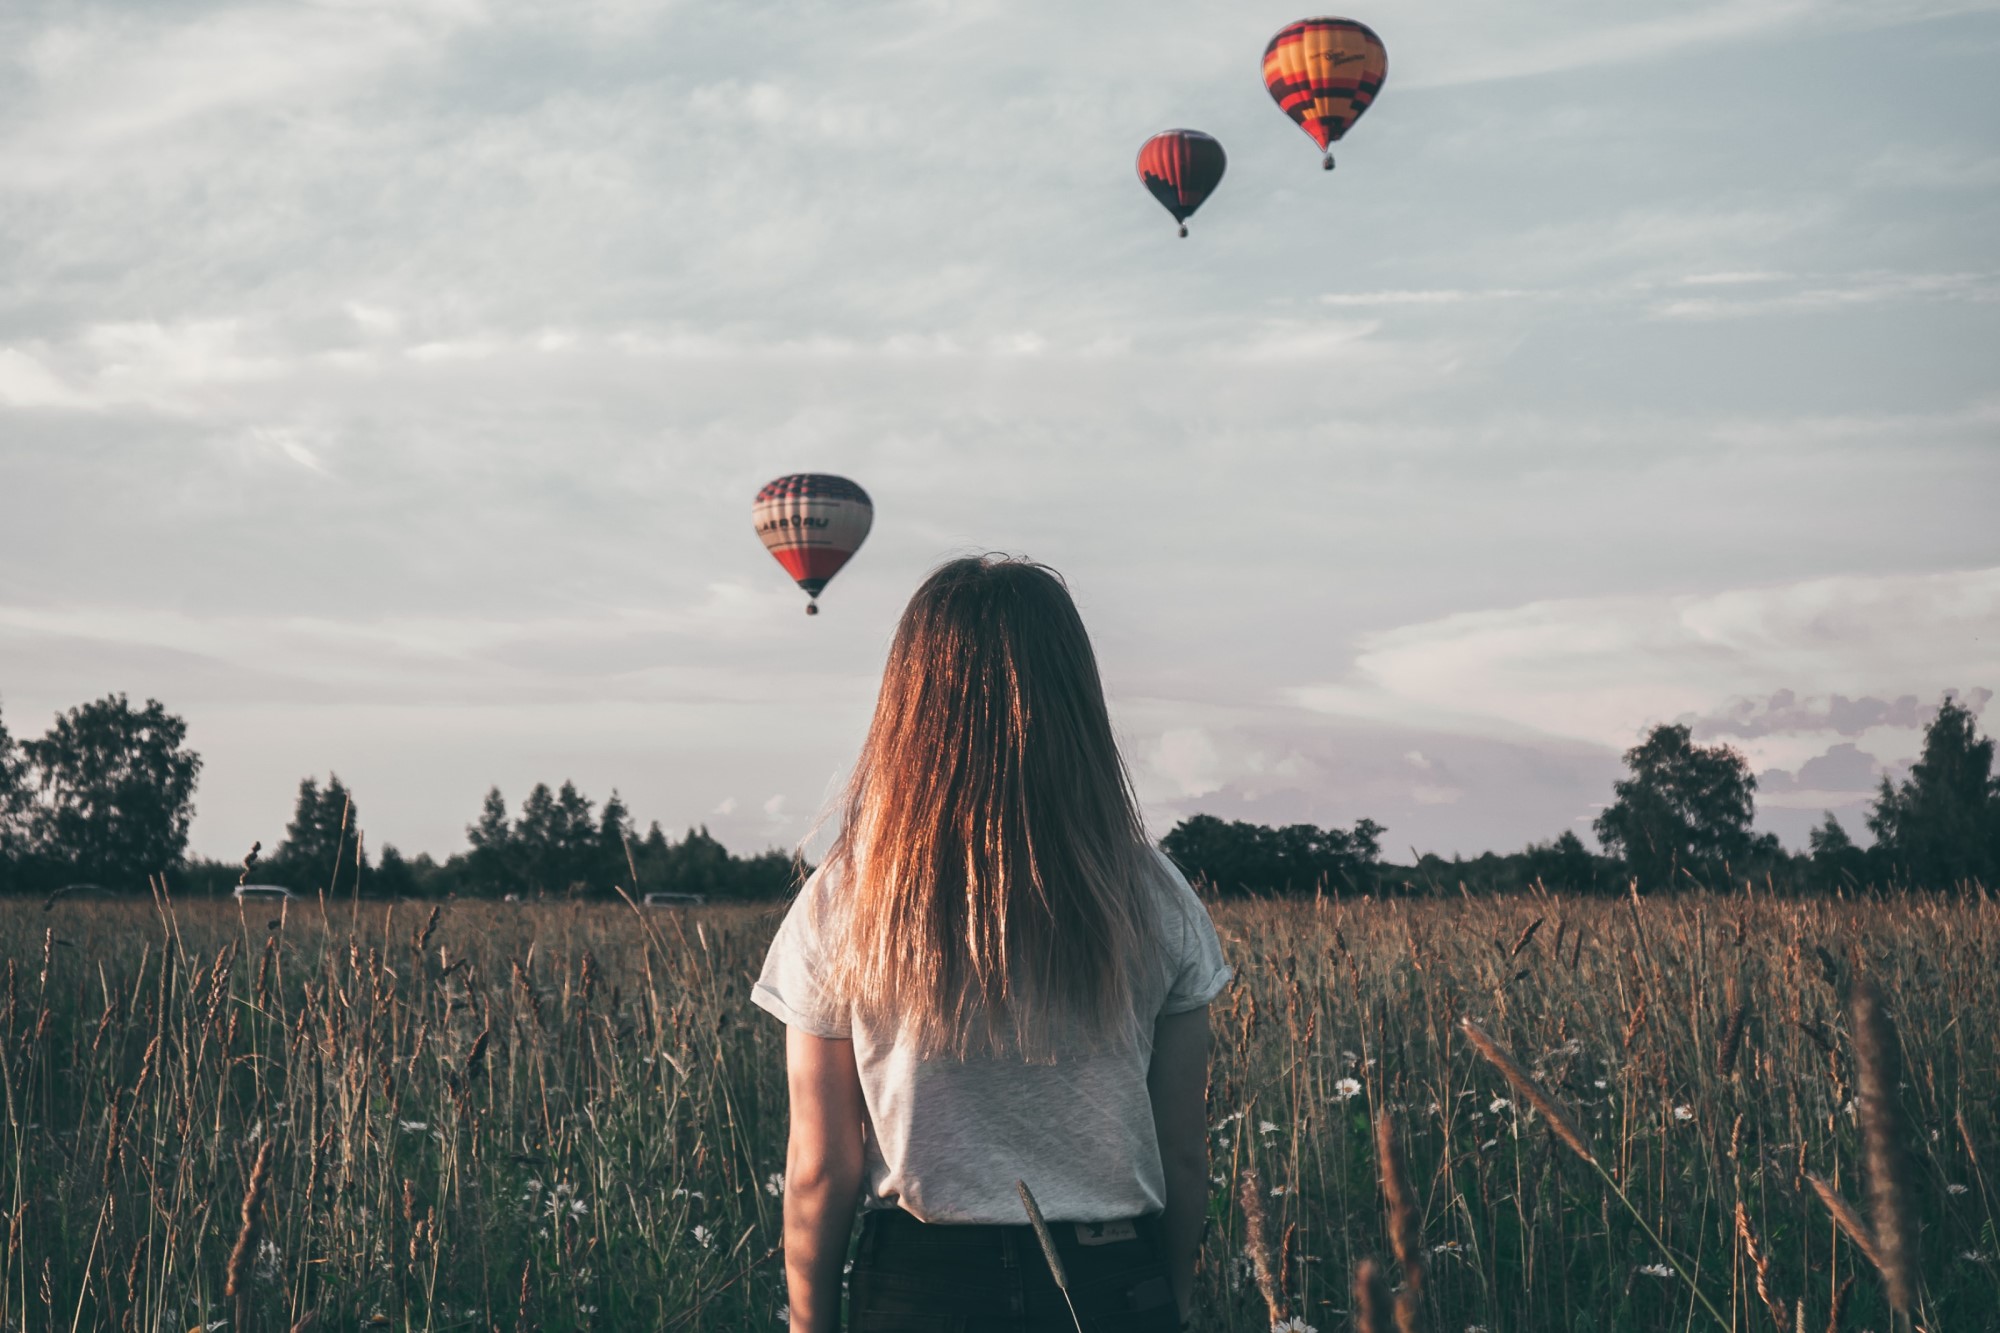 photograph of child standing in field watching hot air balloons